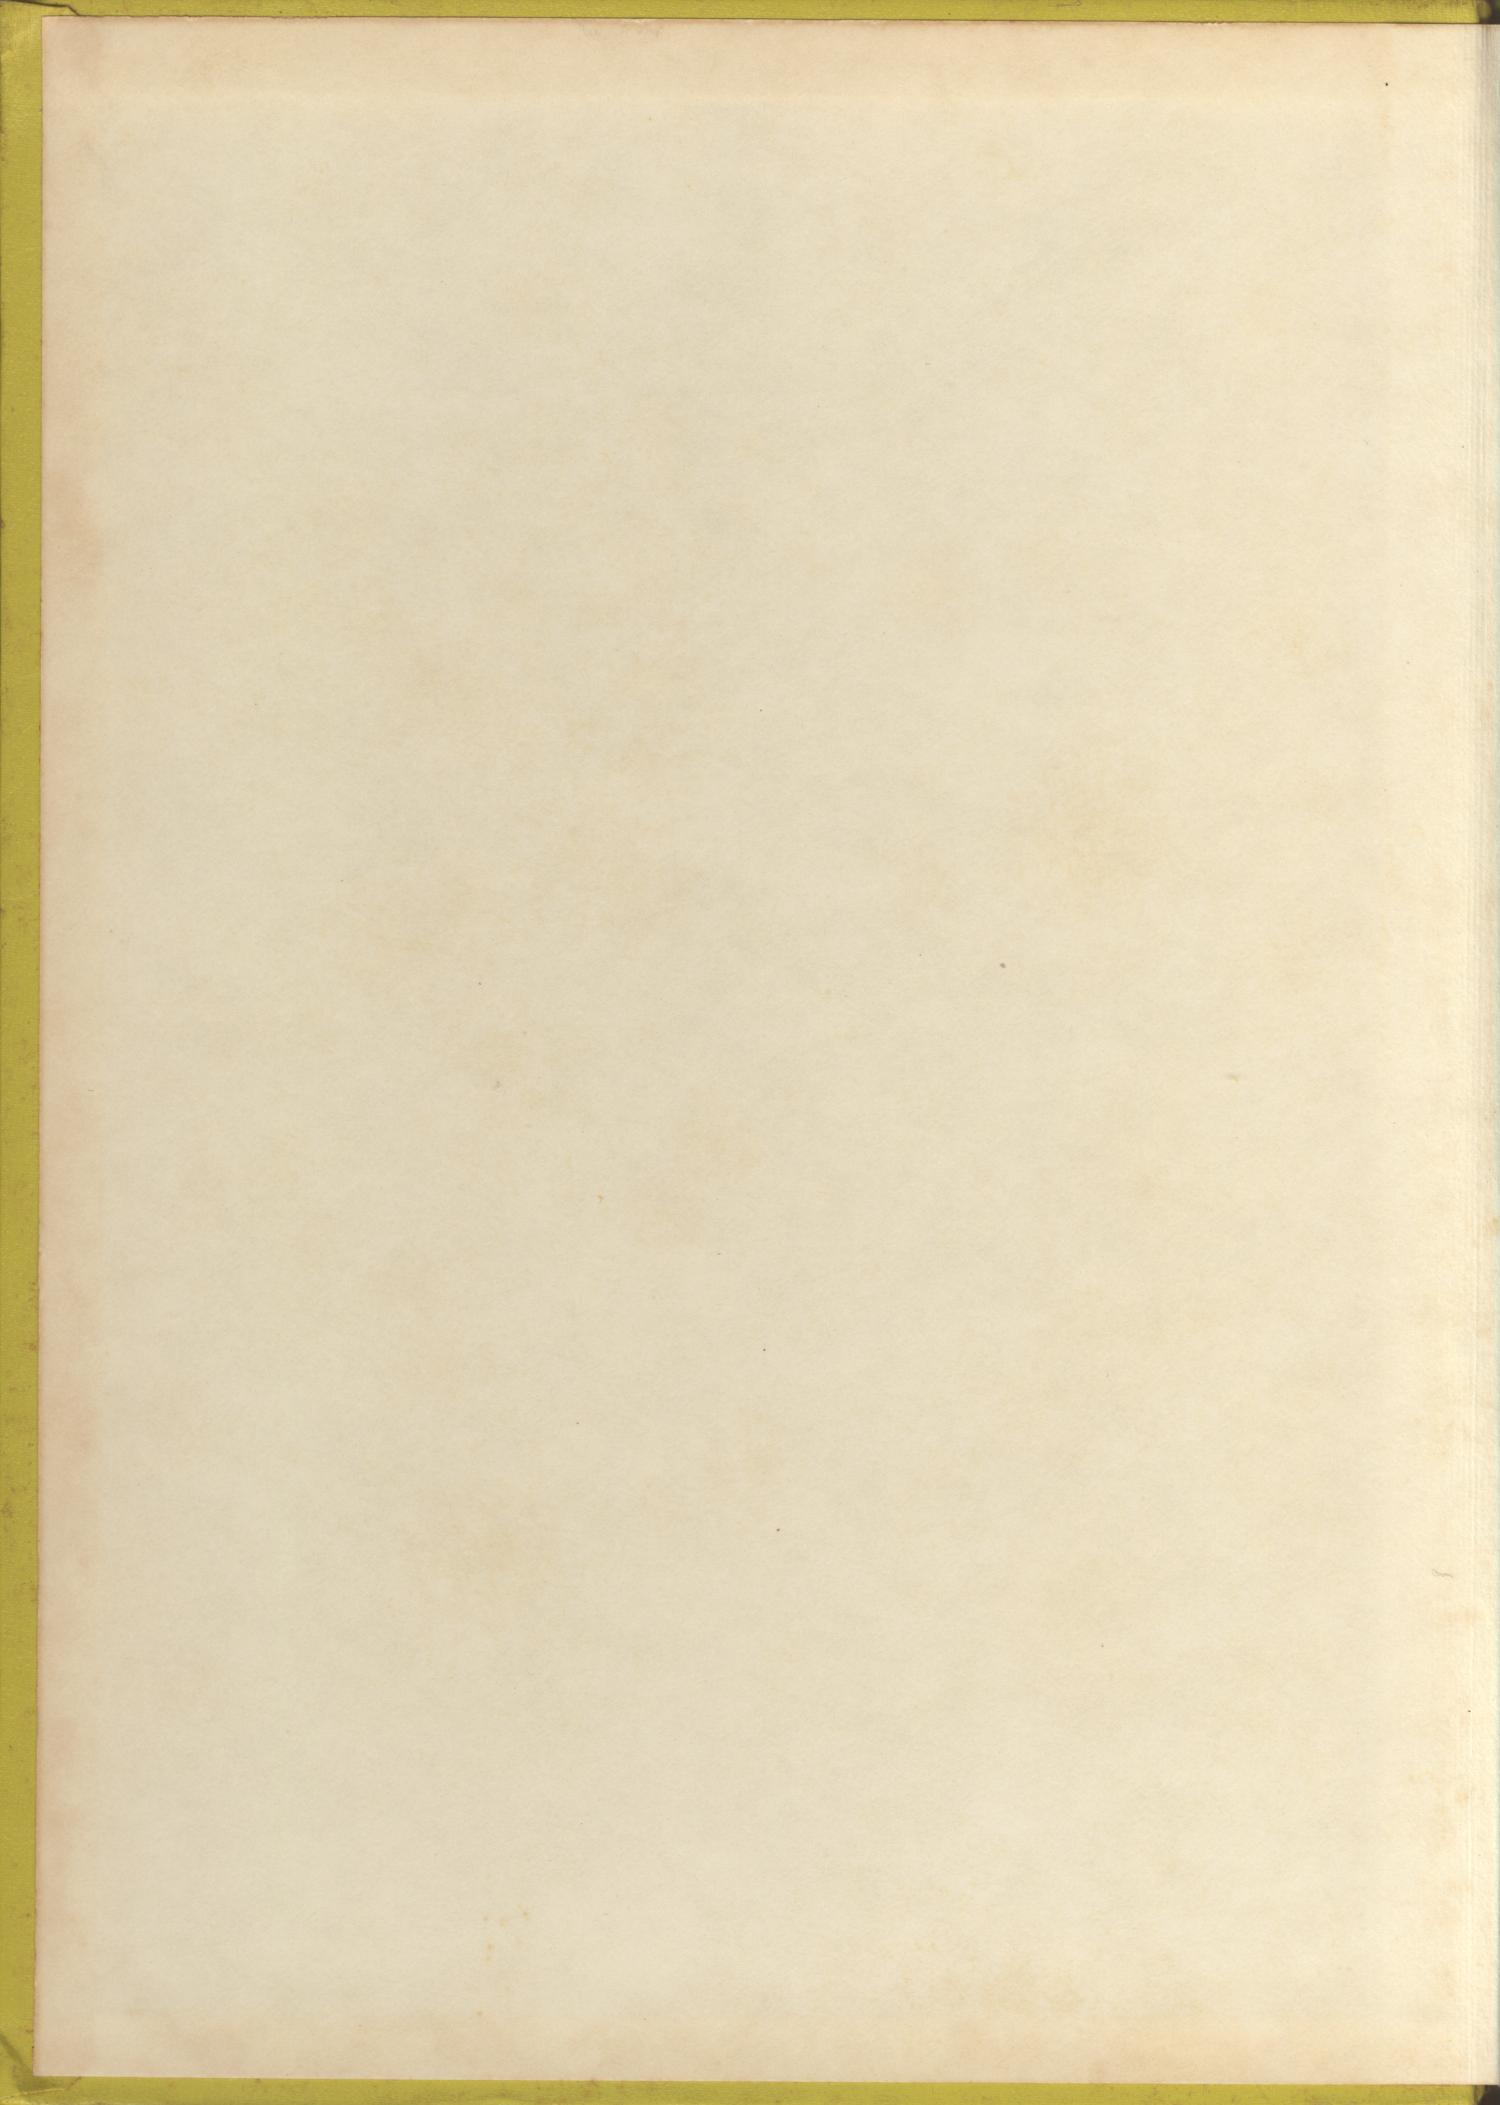 The Bumblebee, Yearbook of Lincoln High School, 1965
                                                
                                                    Front Inside
                                                